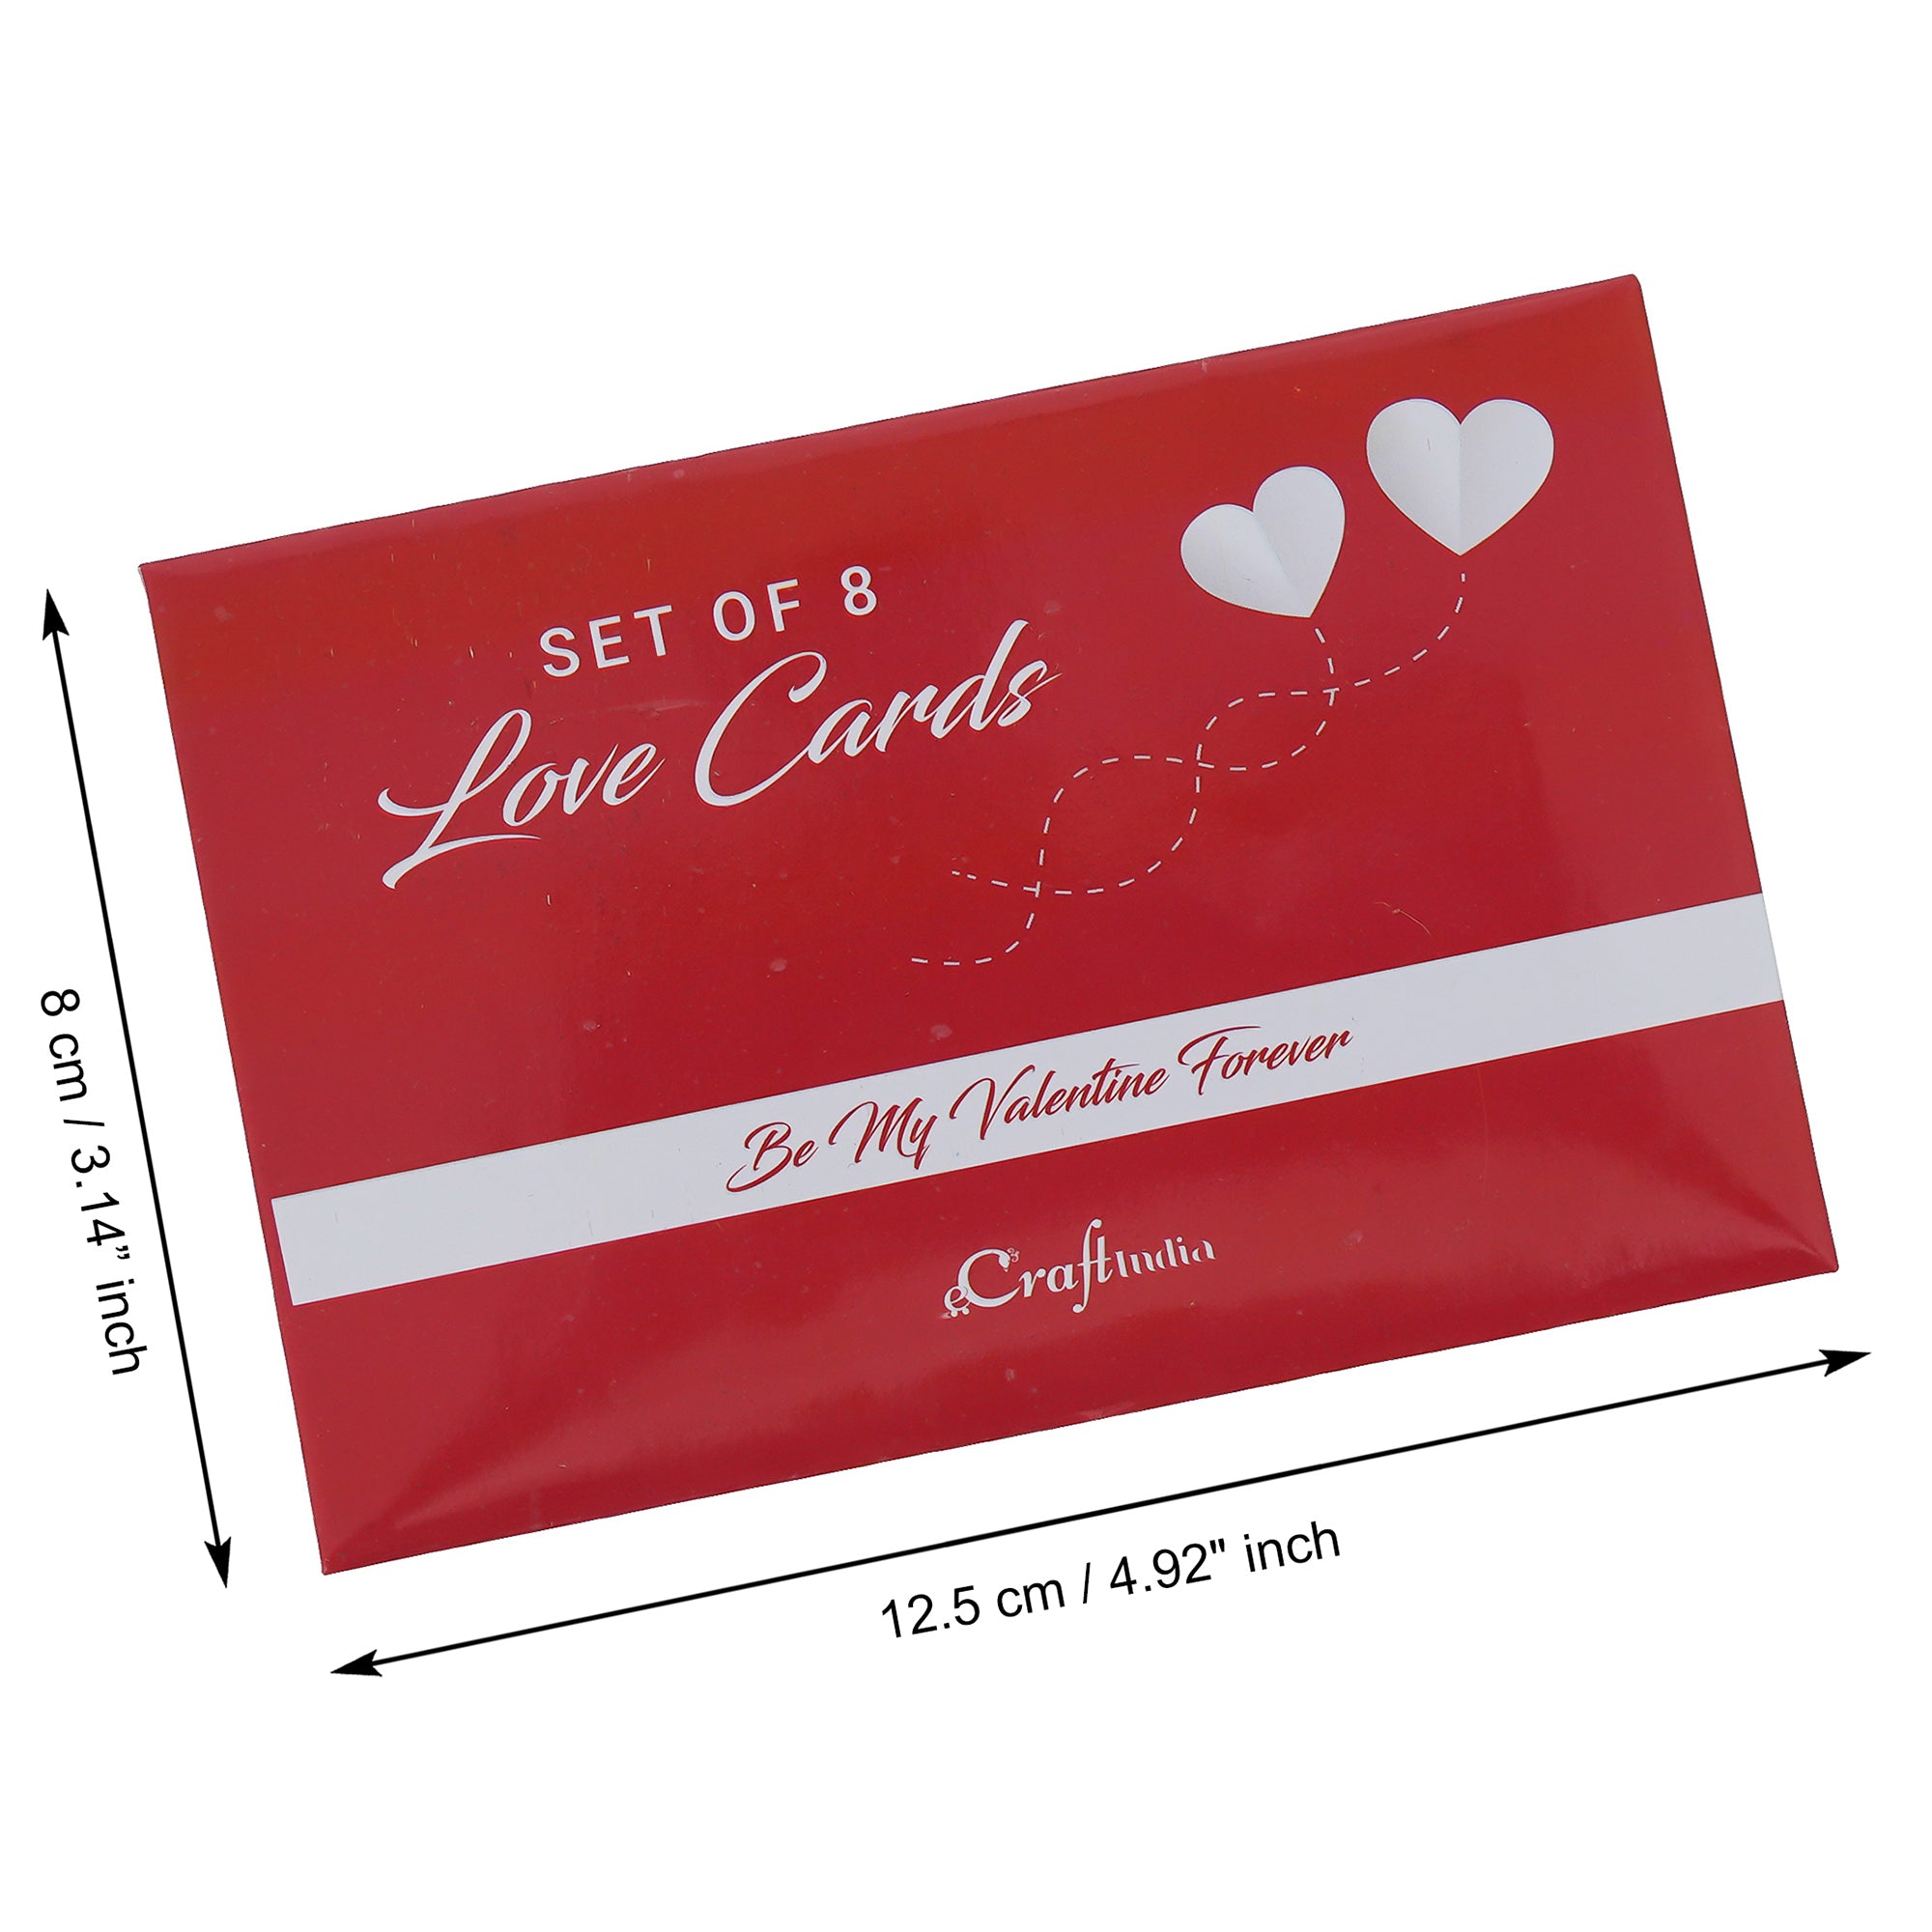 Valentine Combo of Set of 8 Love Post Cards Gift Cards Set, Golden Rose Gift Set, "20 Reasons Why I Love You" Printed on Little Red Hearts Decorative Wooden Gift Set Box 2